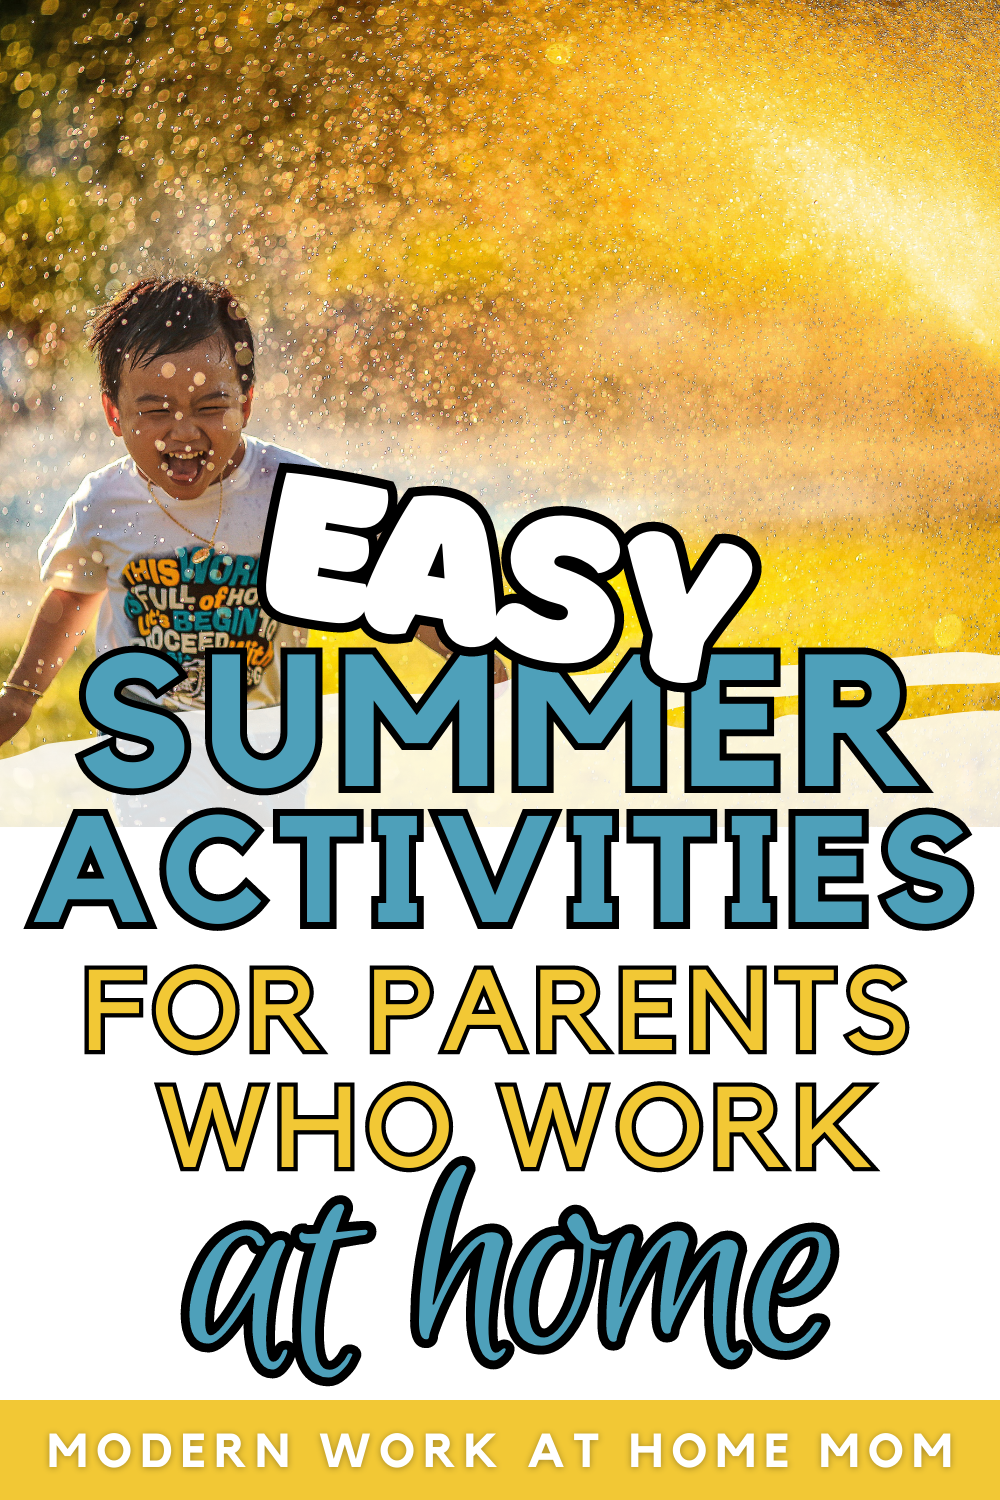 How do I keep my kids busy this summer when working from home